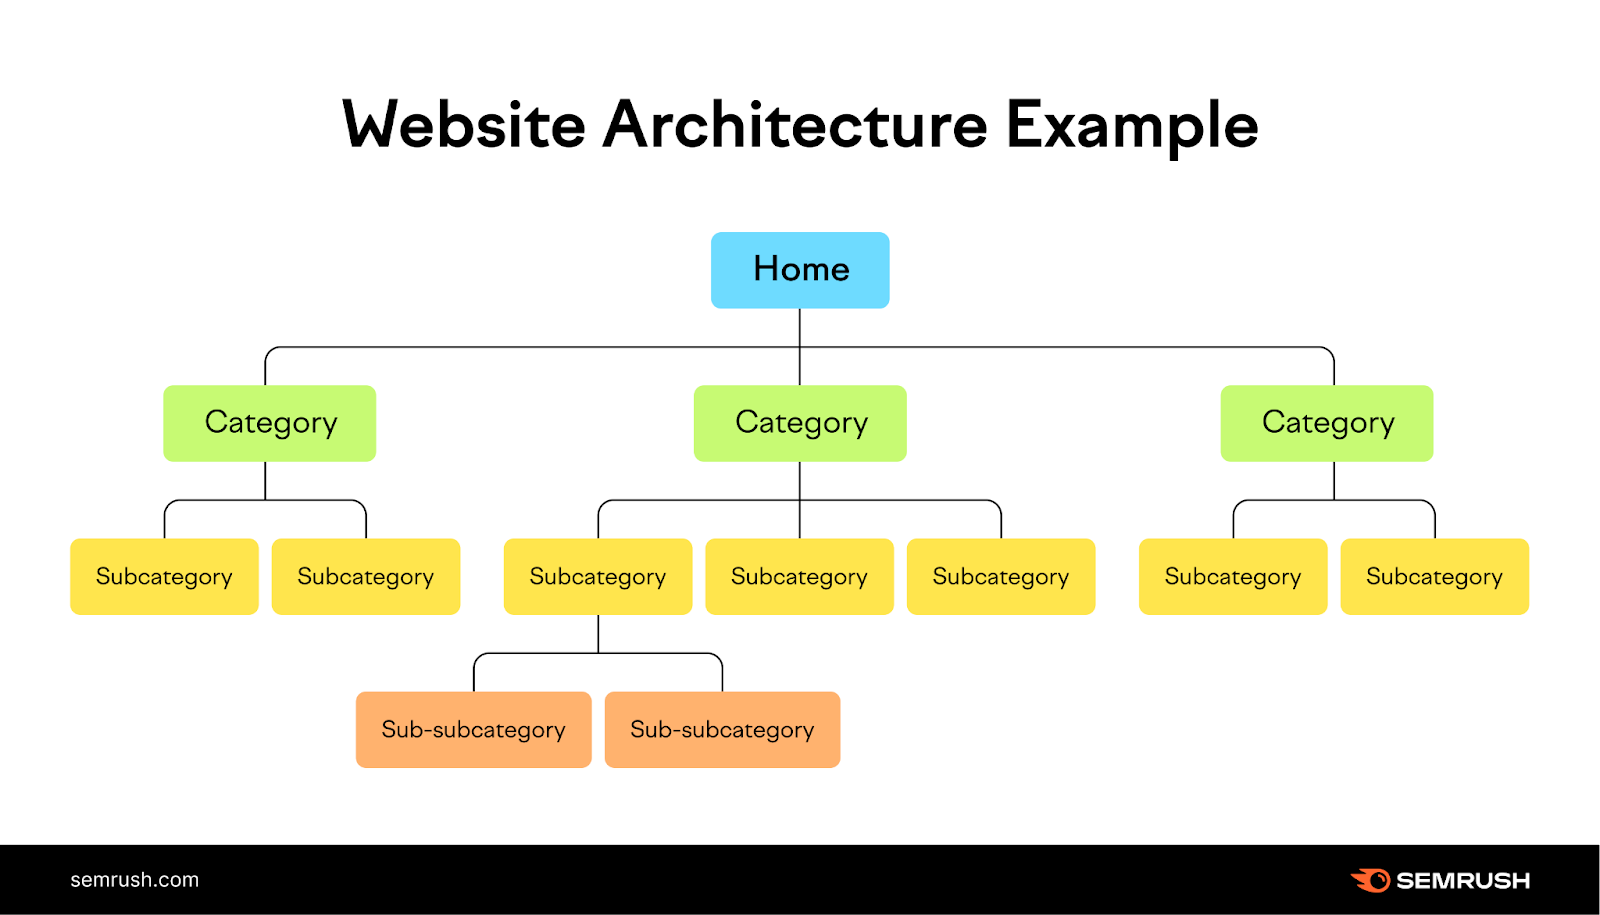 Logical website architecture graphic showing content grouped by categories